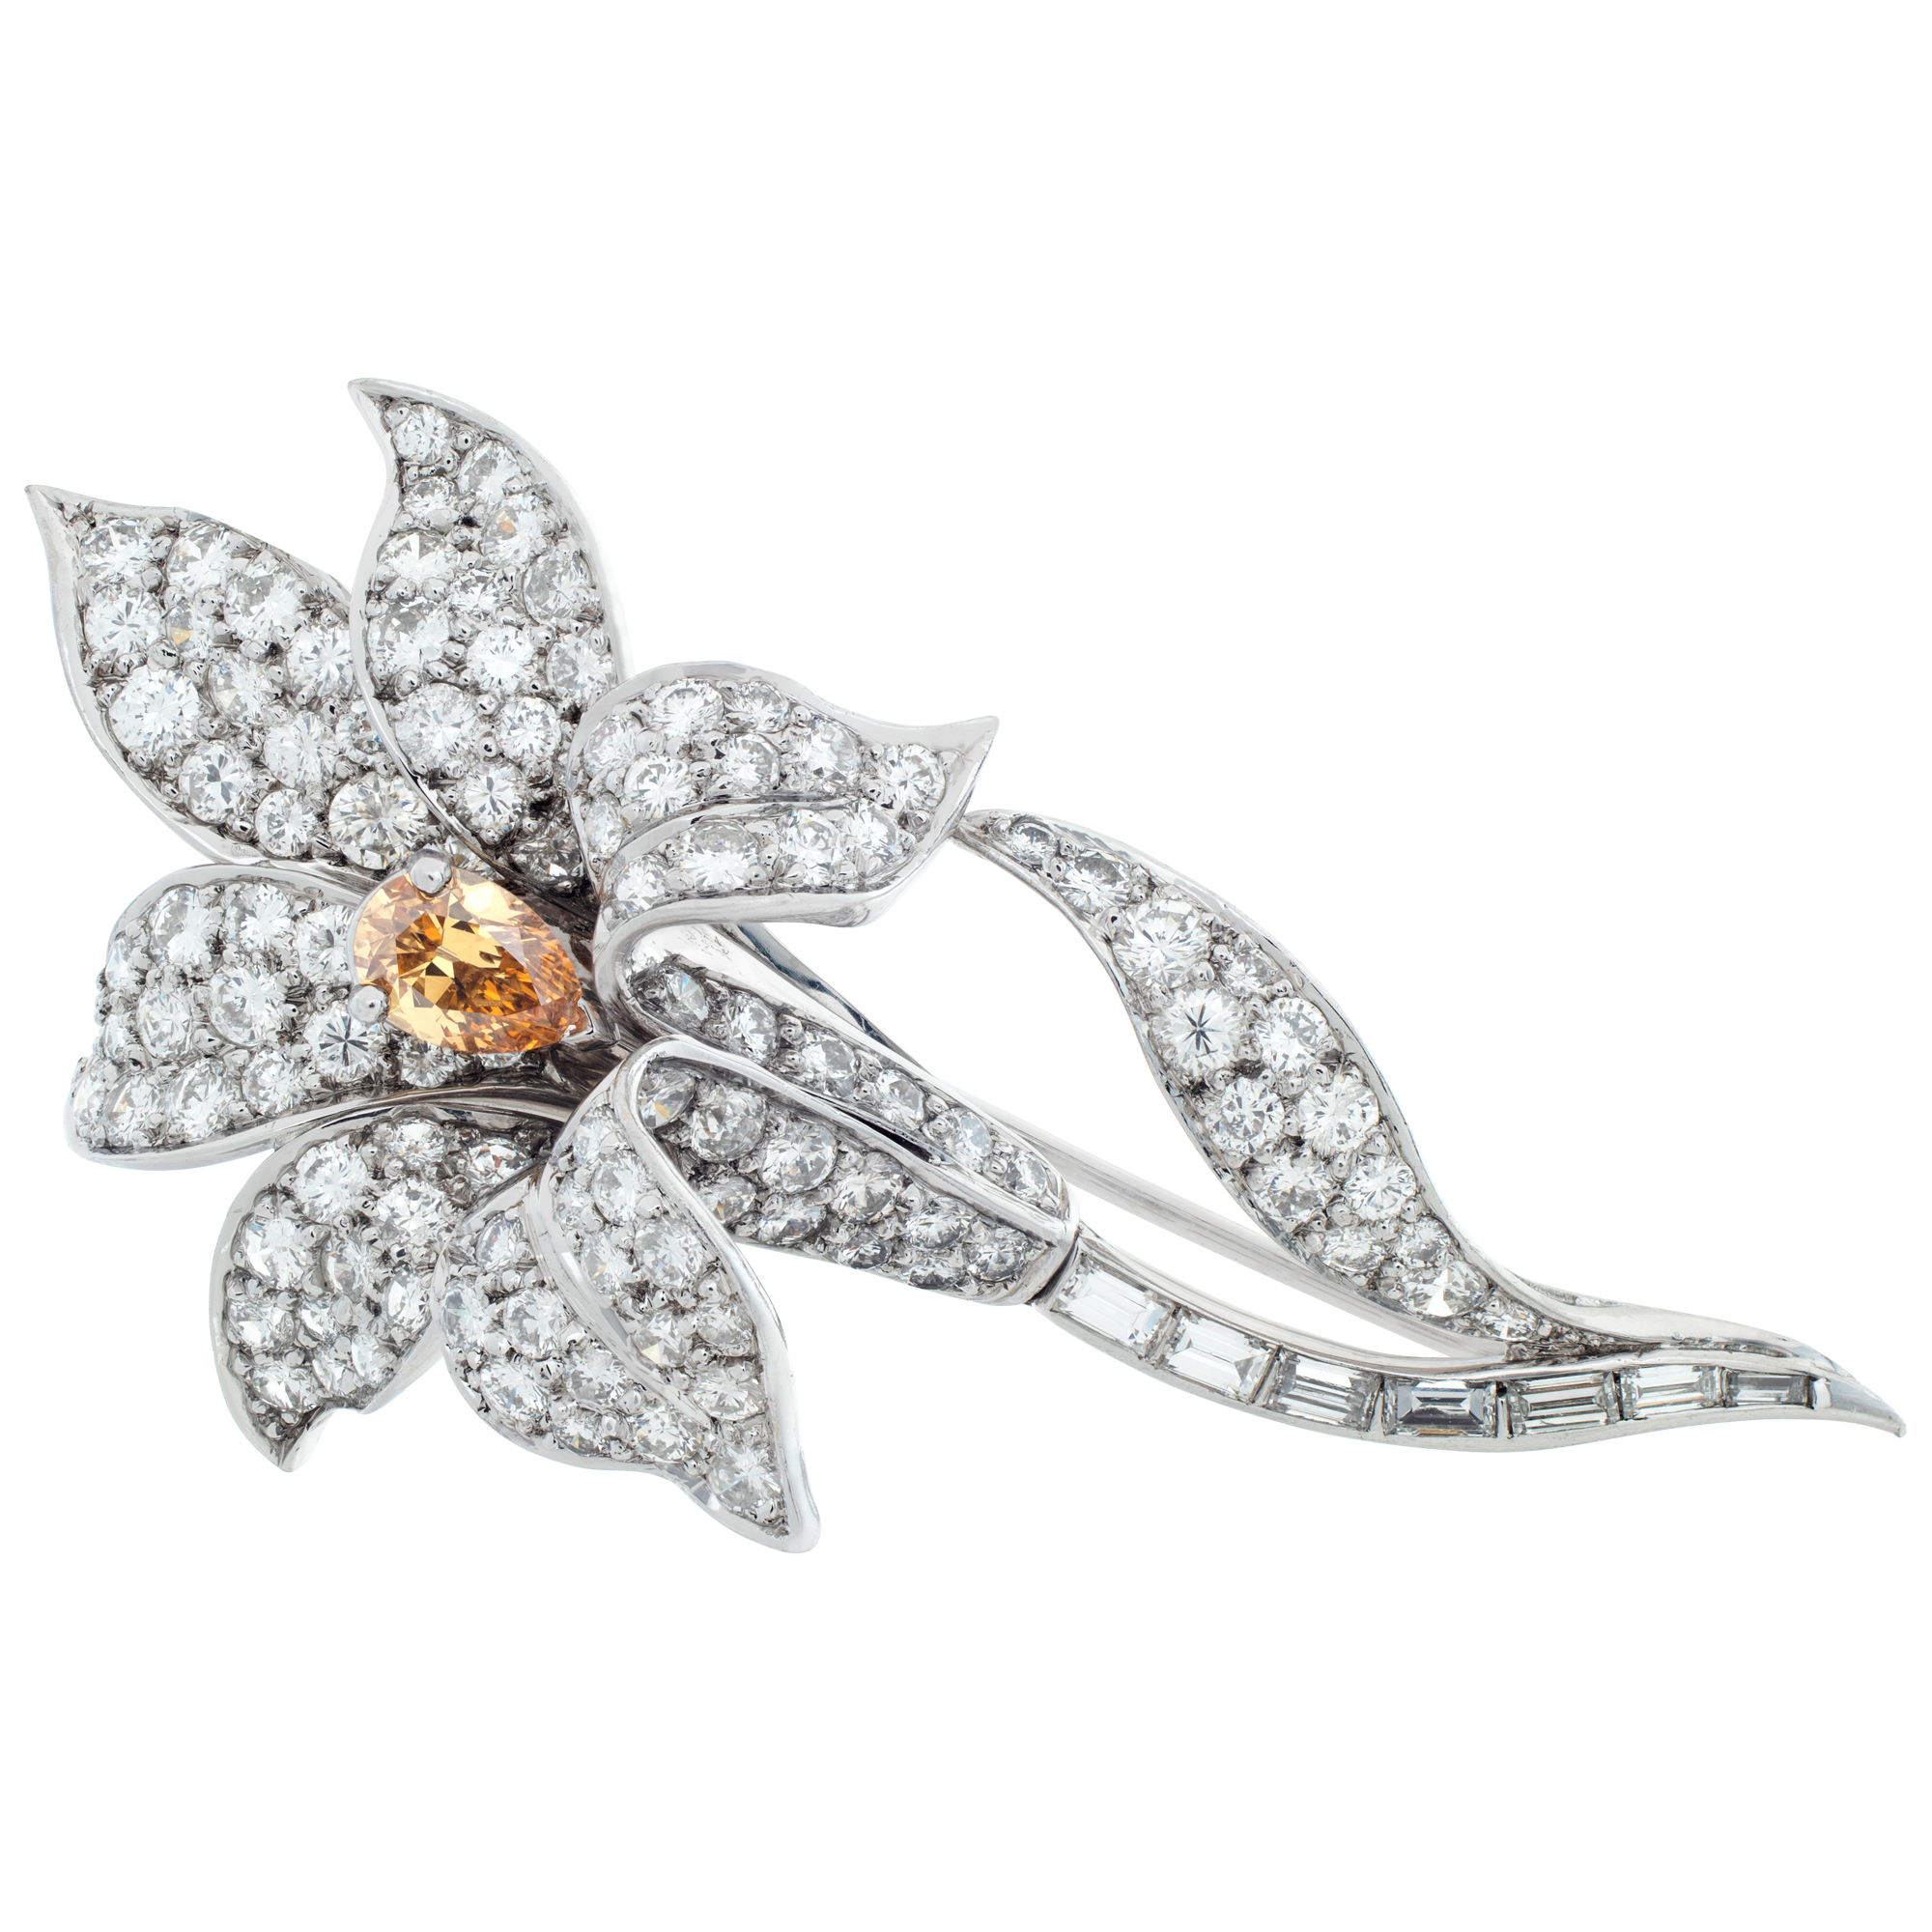 Flower brooch with round brilliant and baguette diamonds set in 18K white gold.